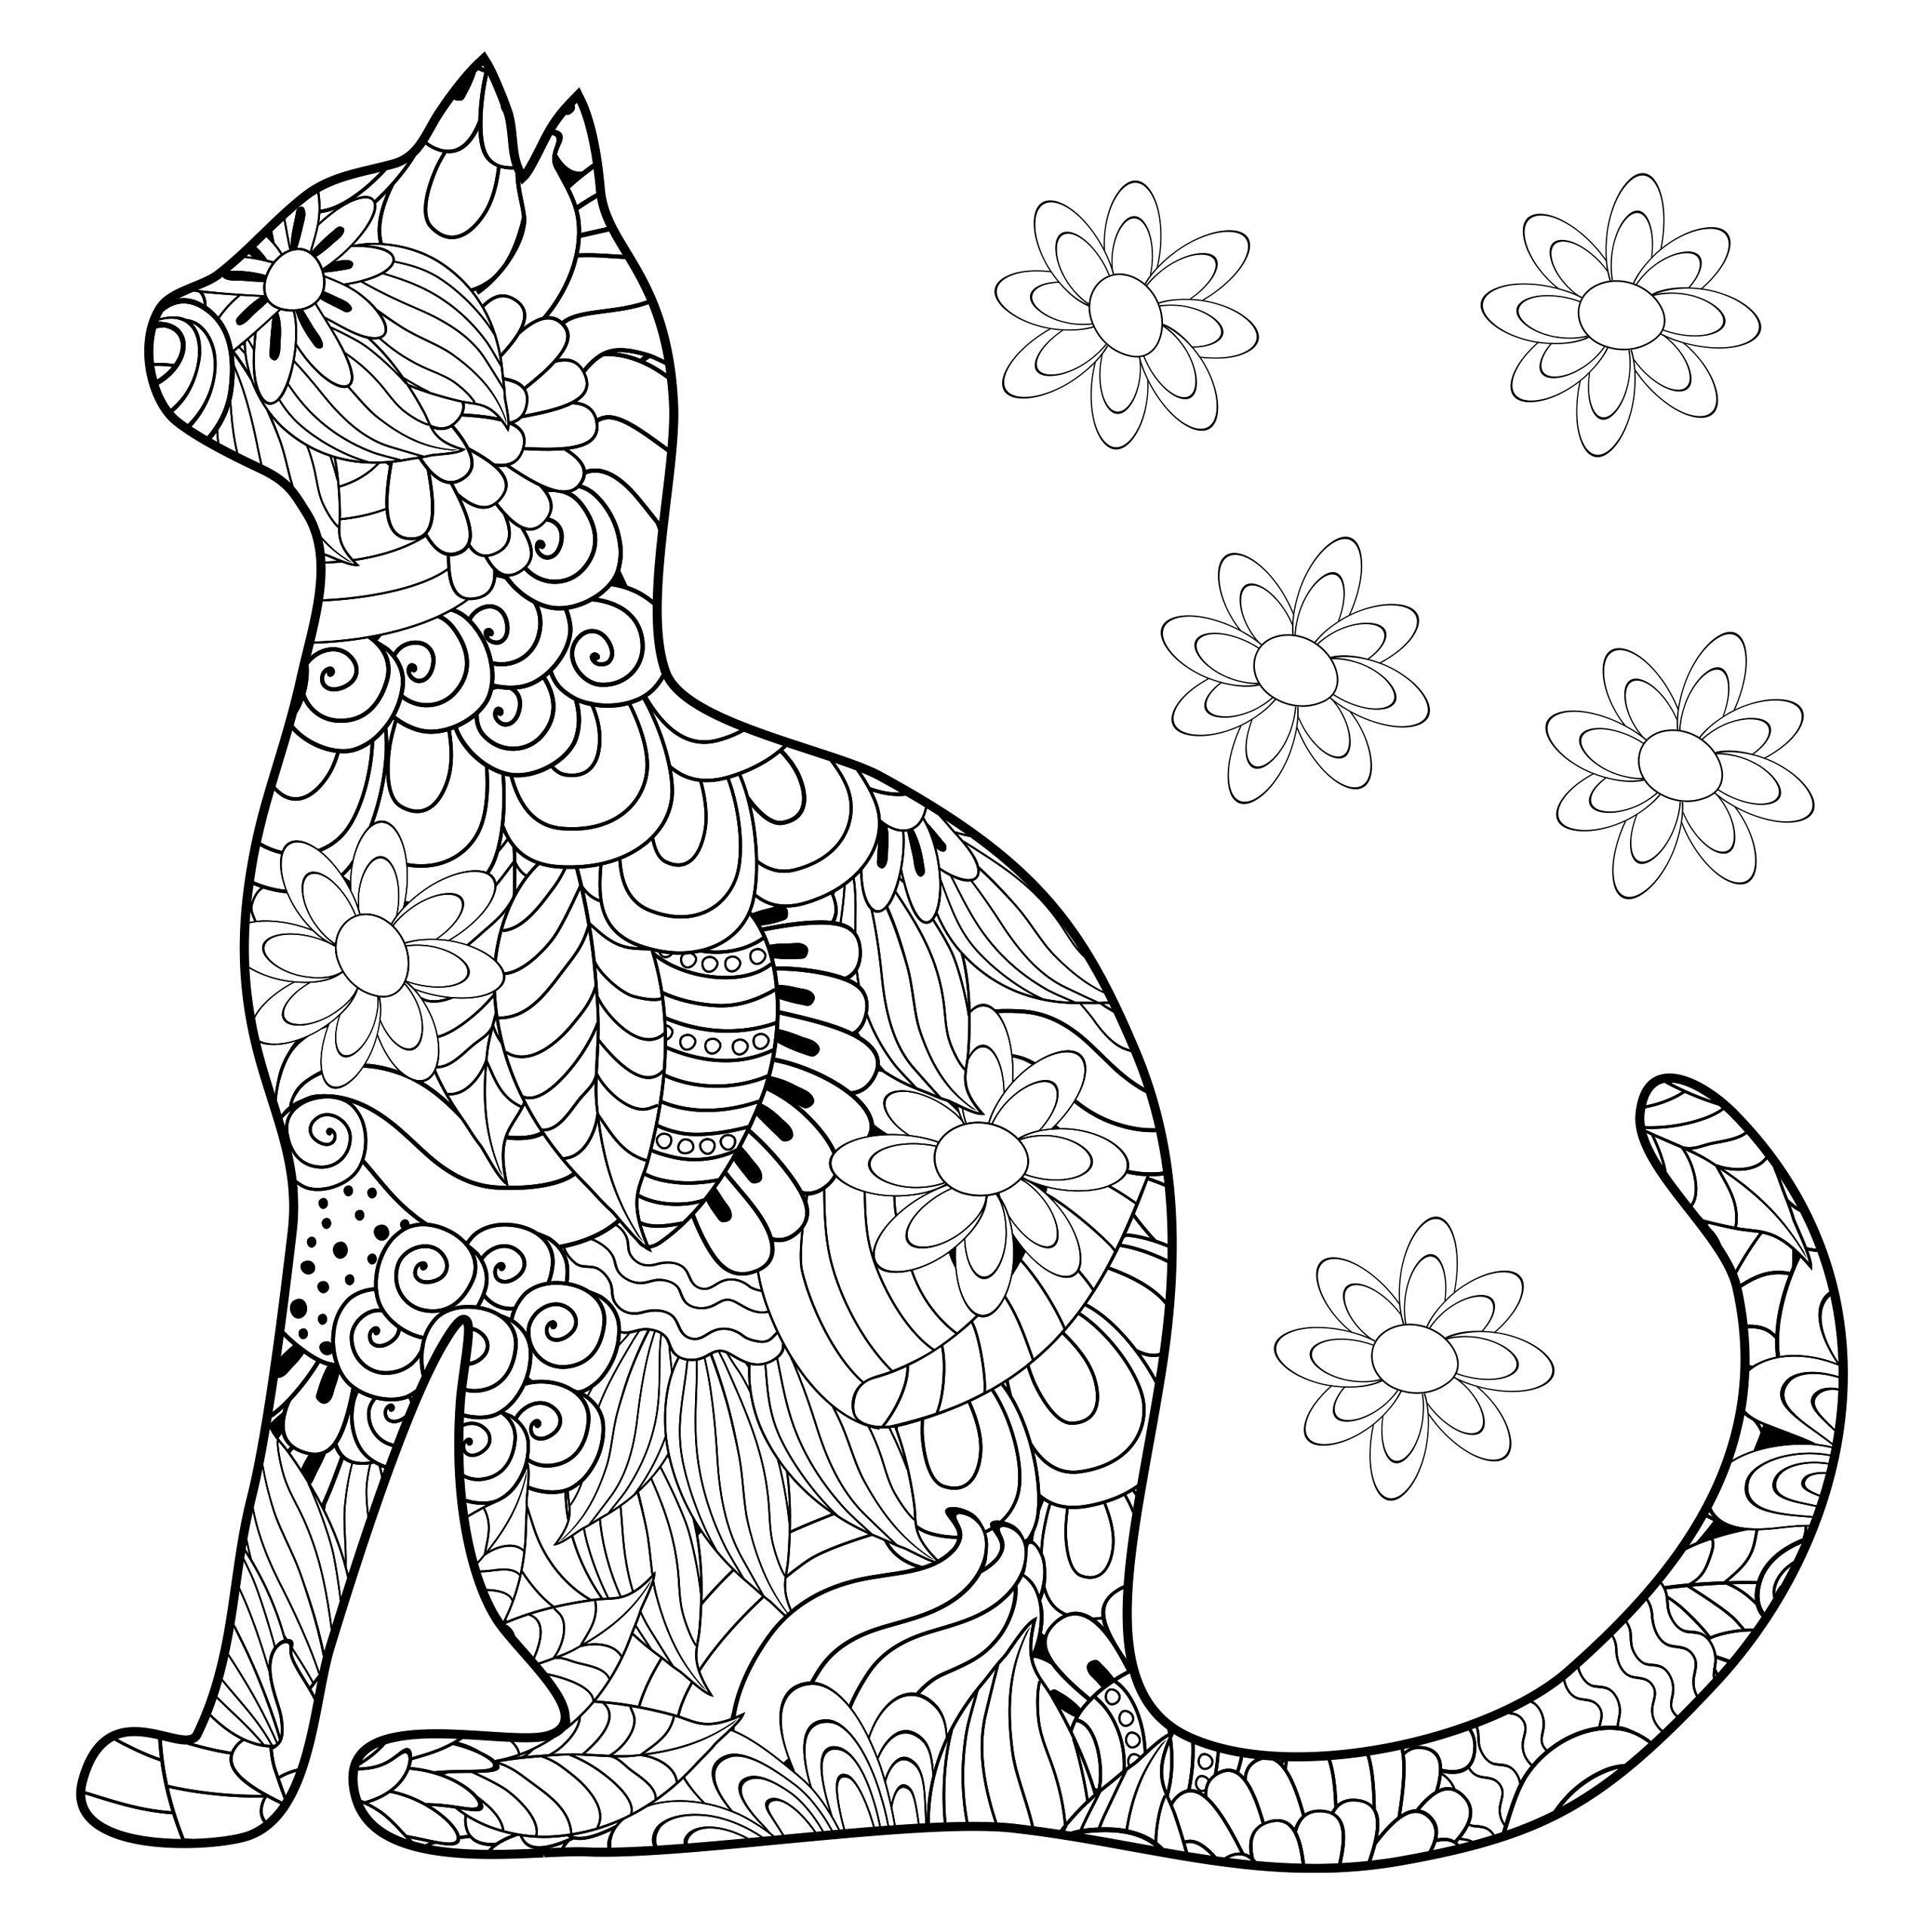 Patterned cat #3